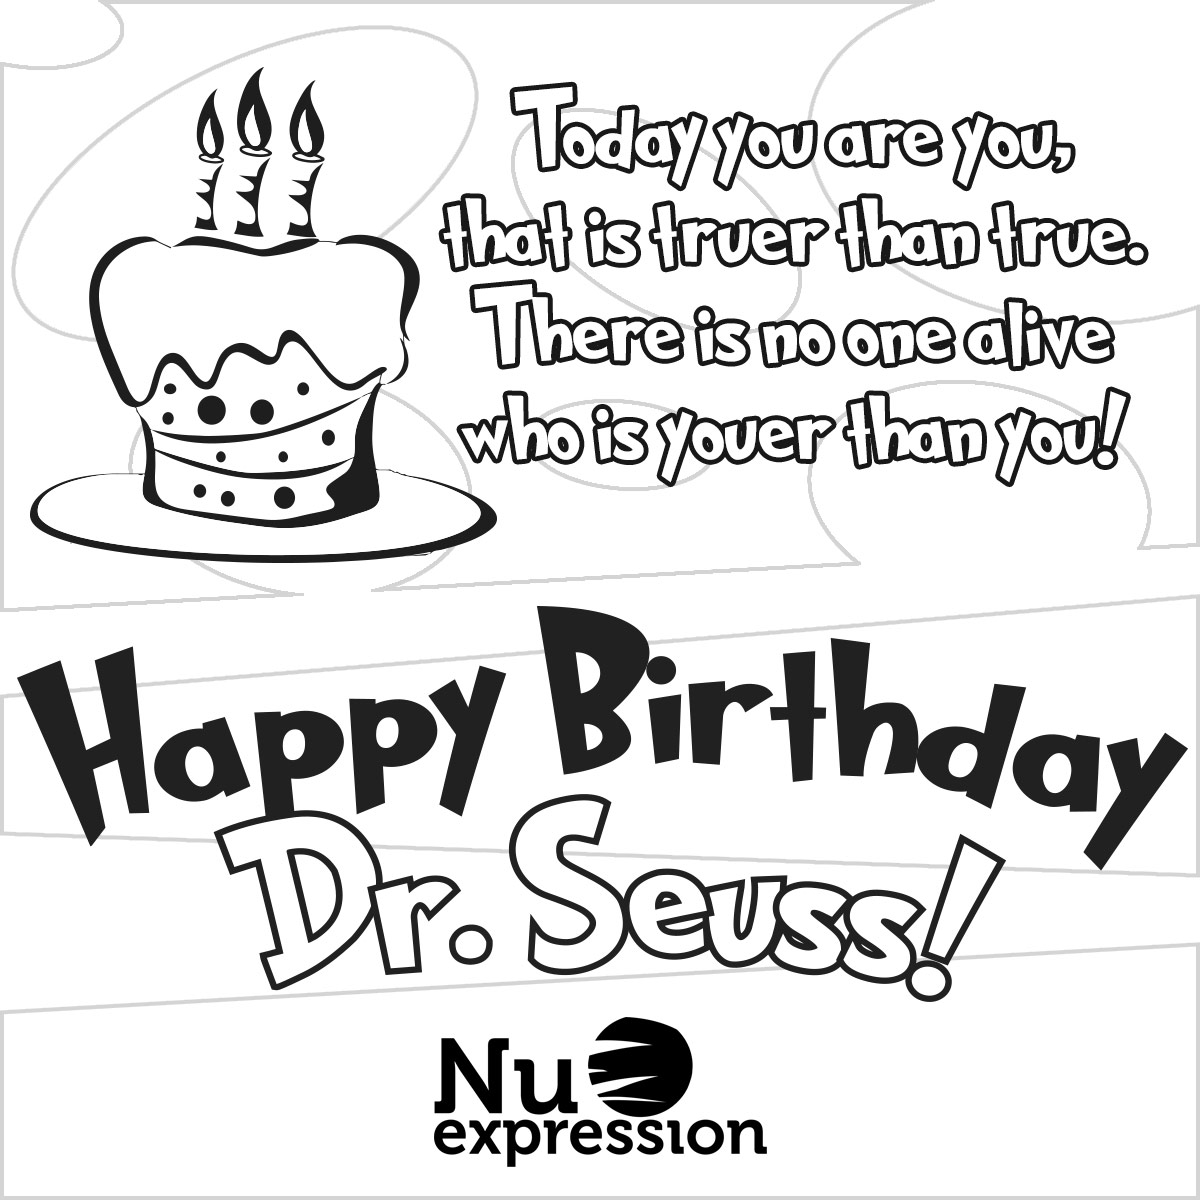 Dr Seuss Birthday Coloring Pages at Free printable